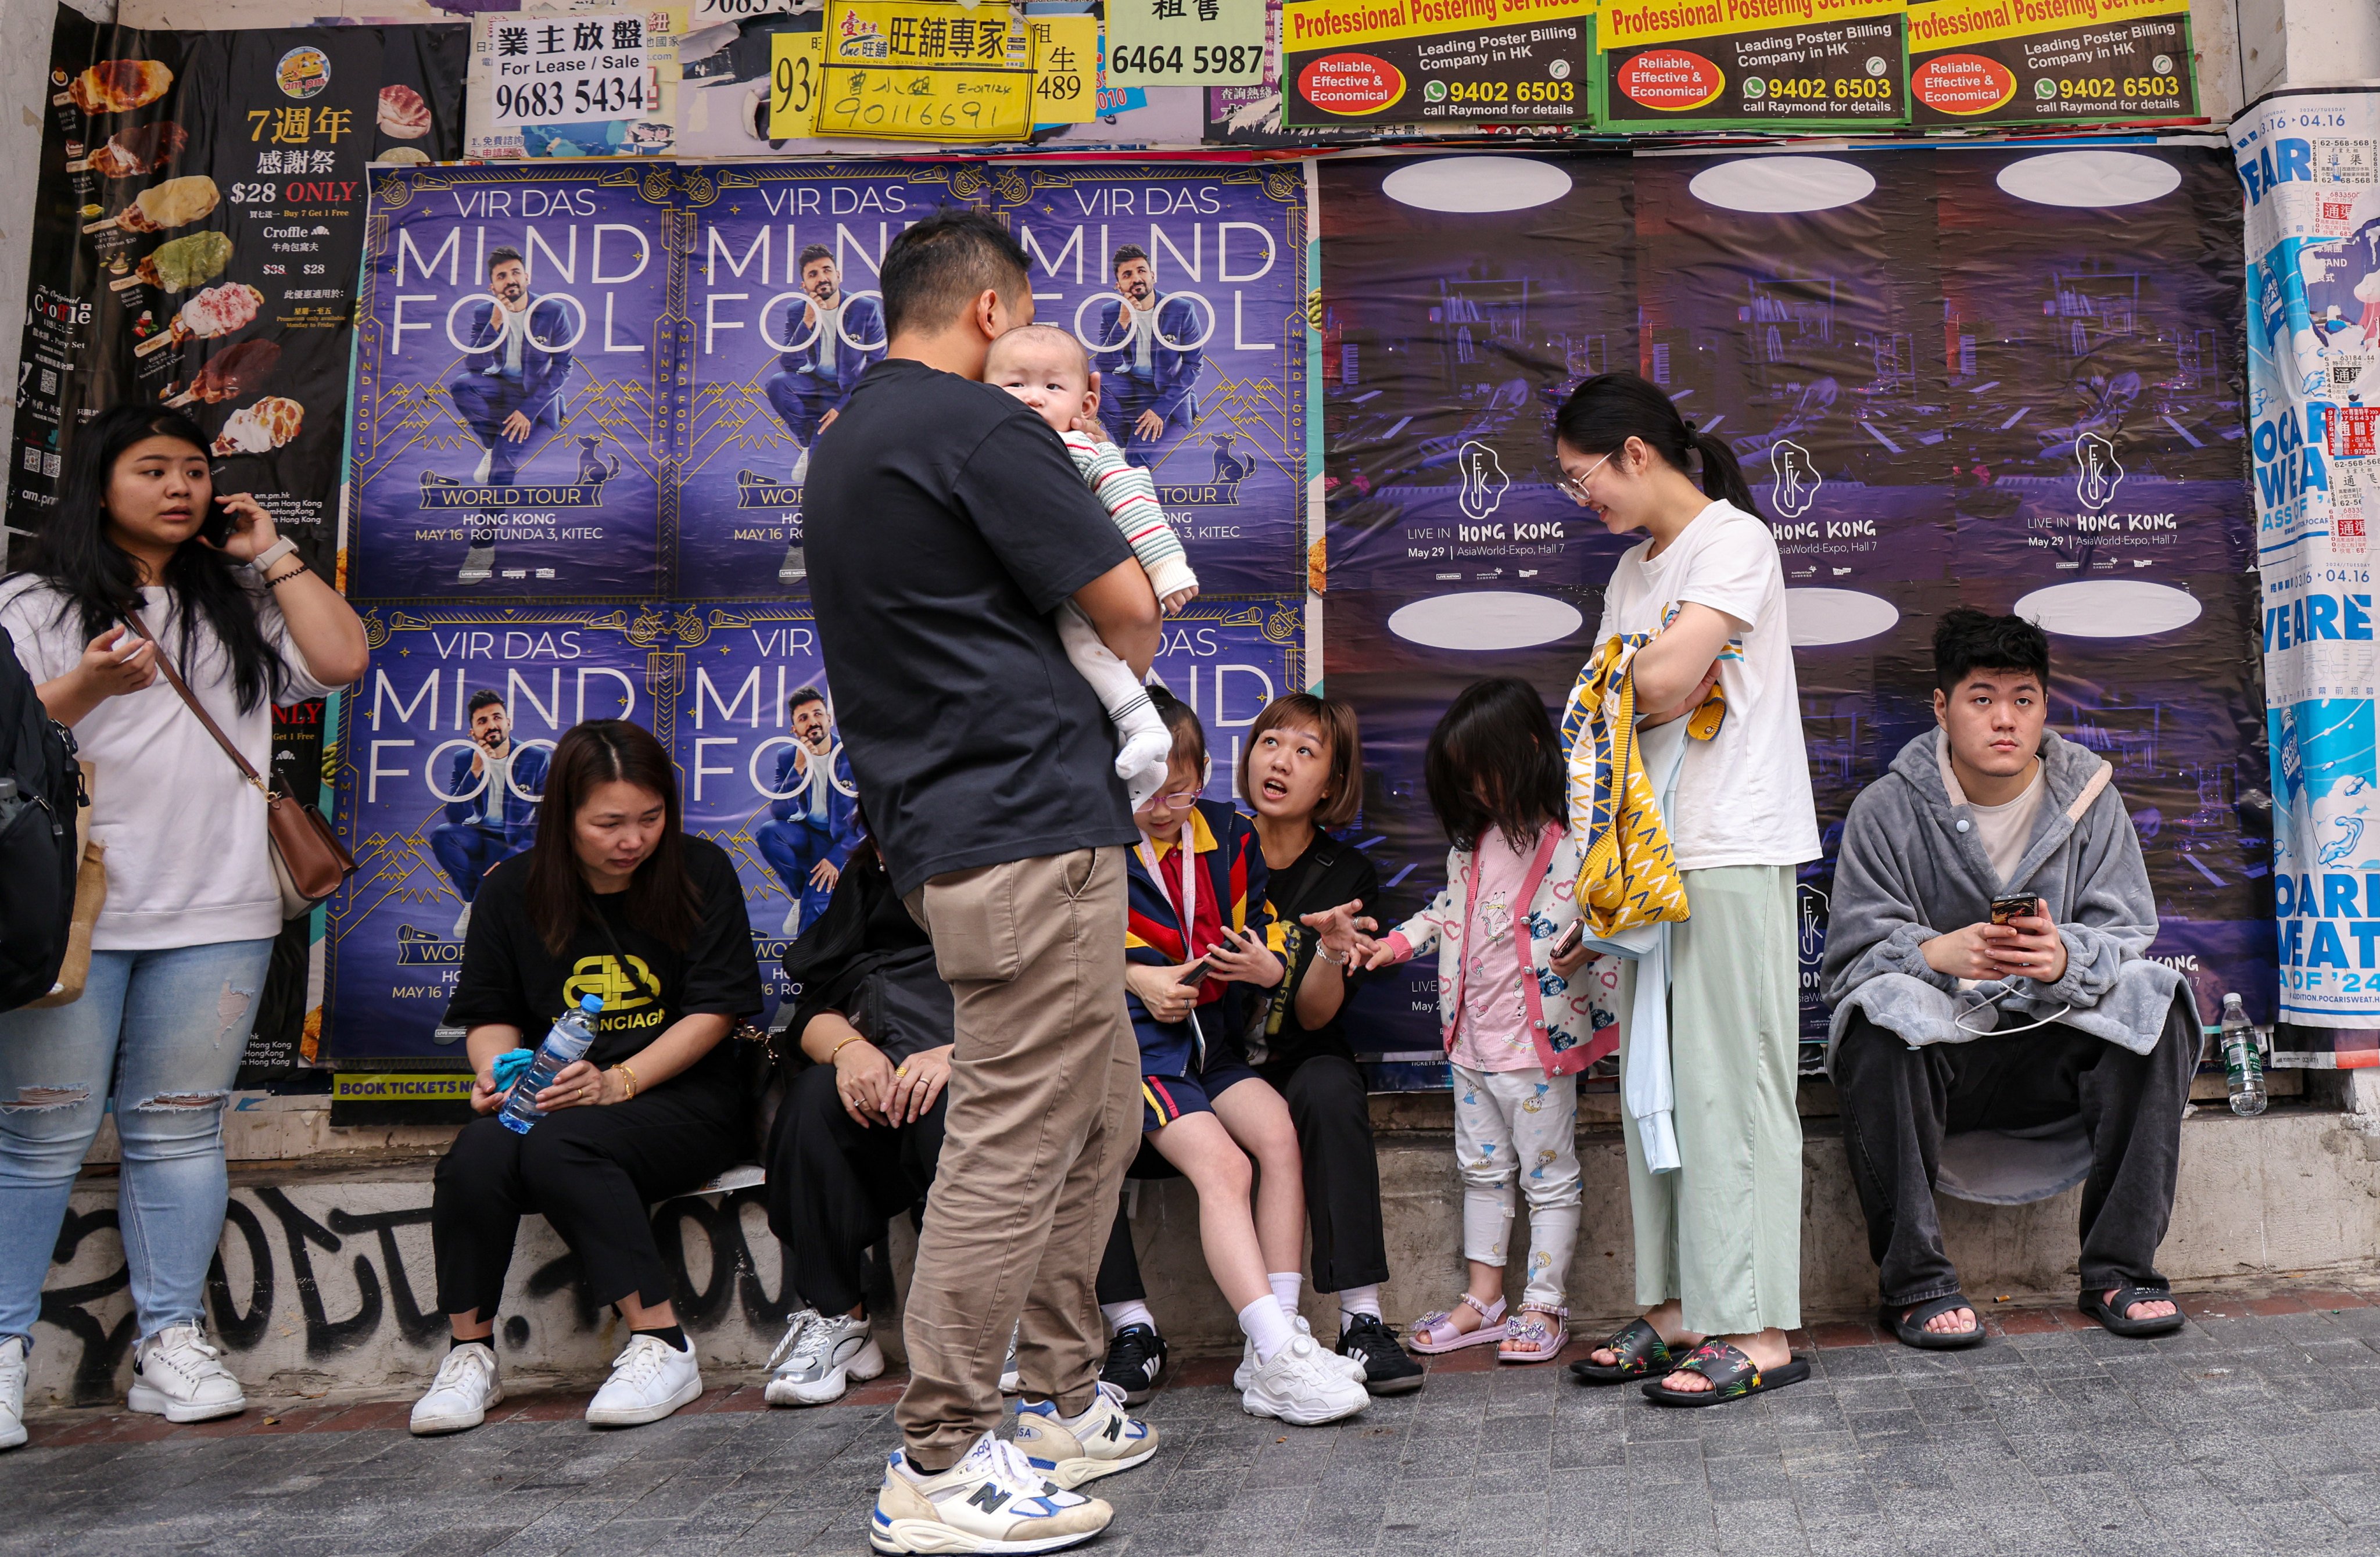 Residents congregate after a fire broke out at New Lucky House in Hong Kong’s Yau Ma Tei neighbourhood on April 10. Photo: Jelly Tse